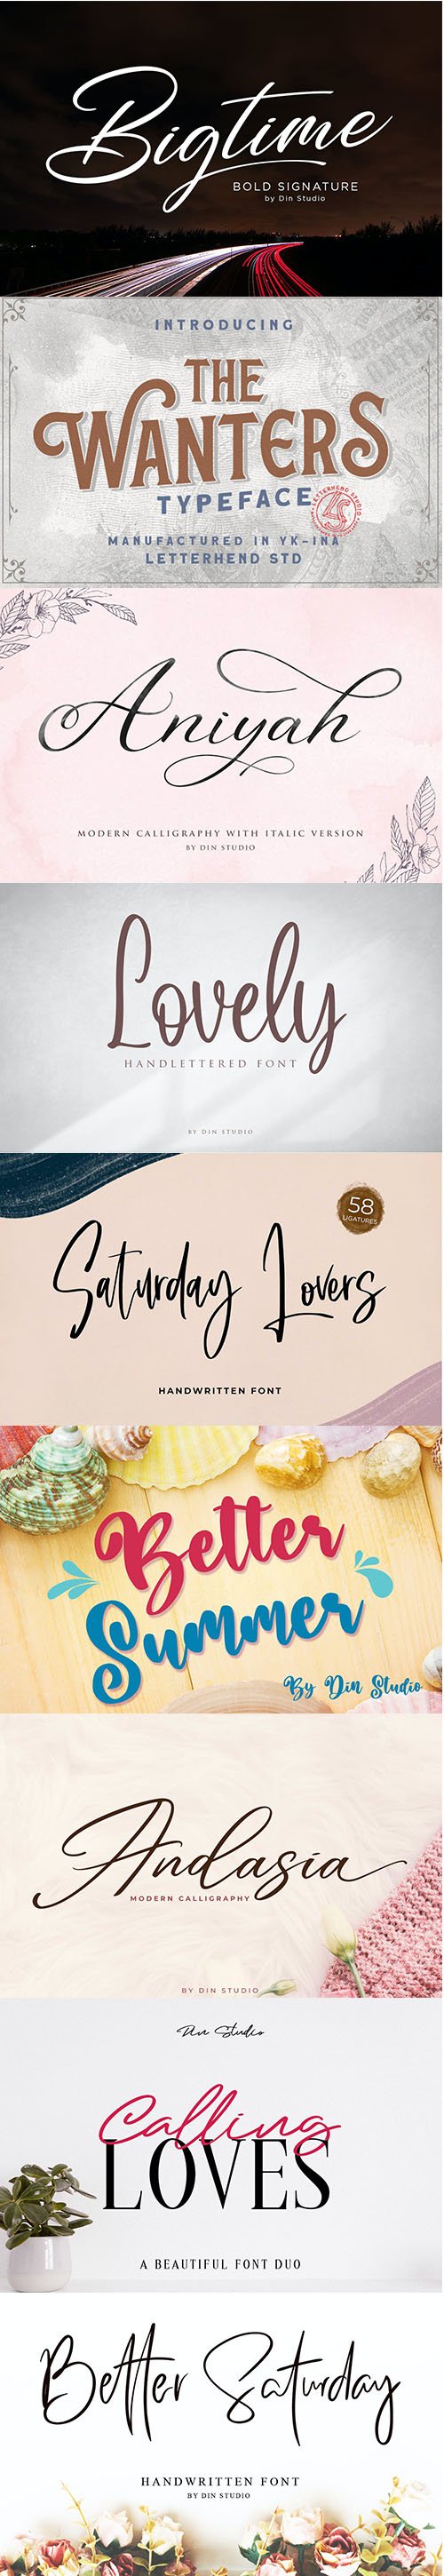 Pack of 9 Creative Fonts Vol 4